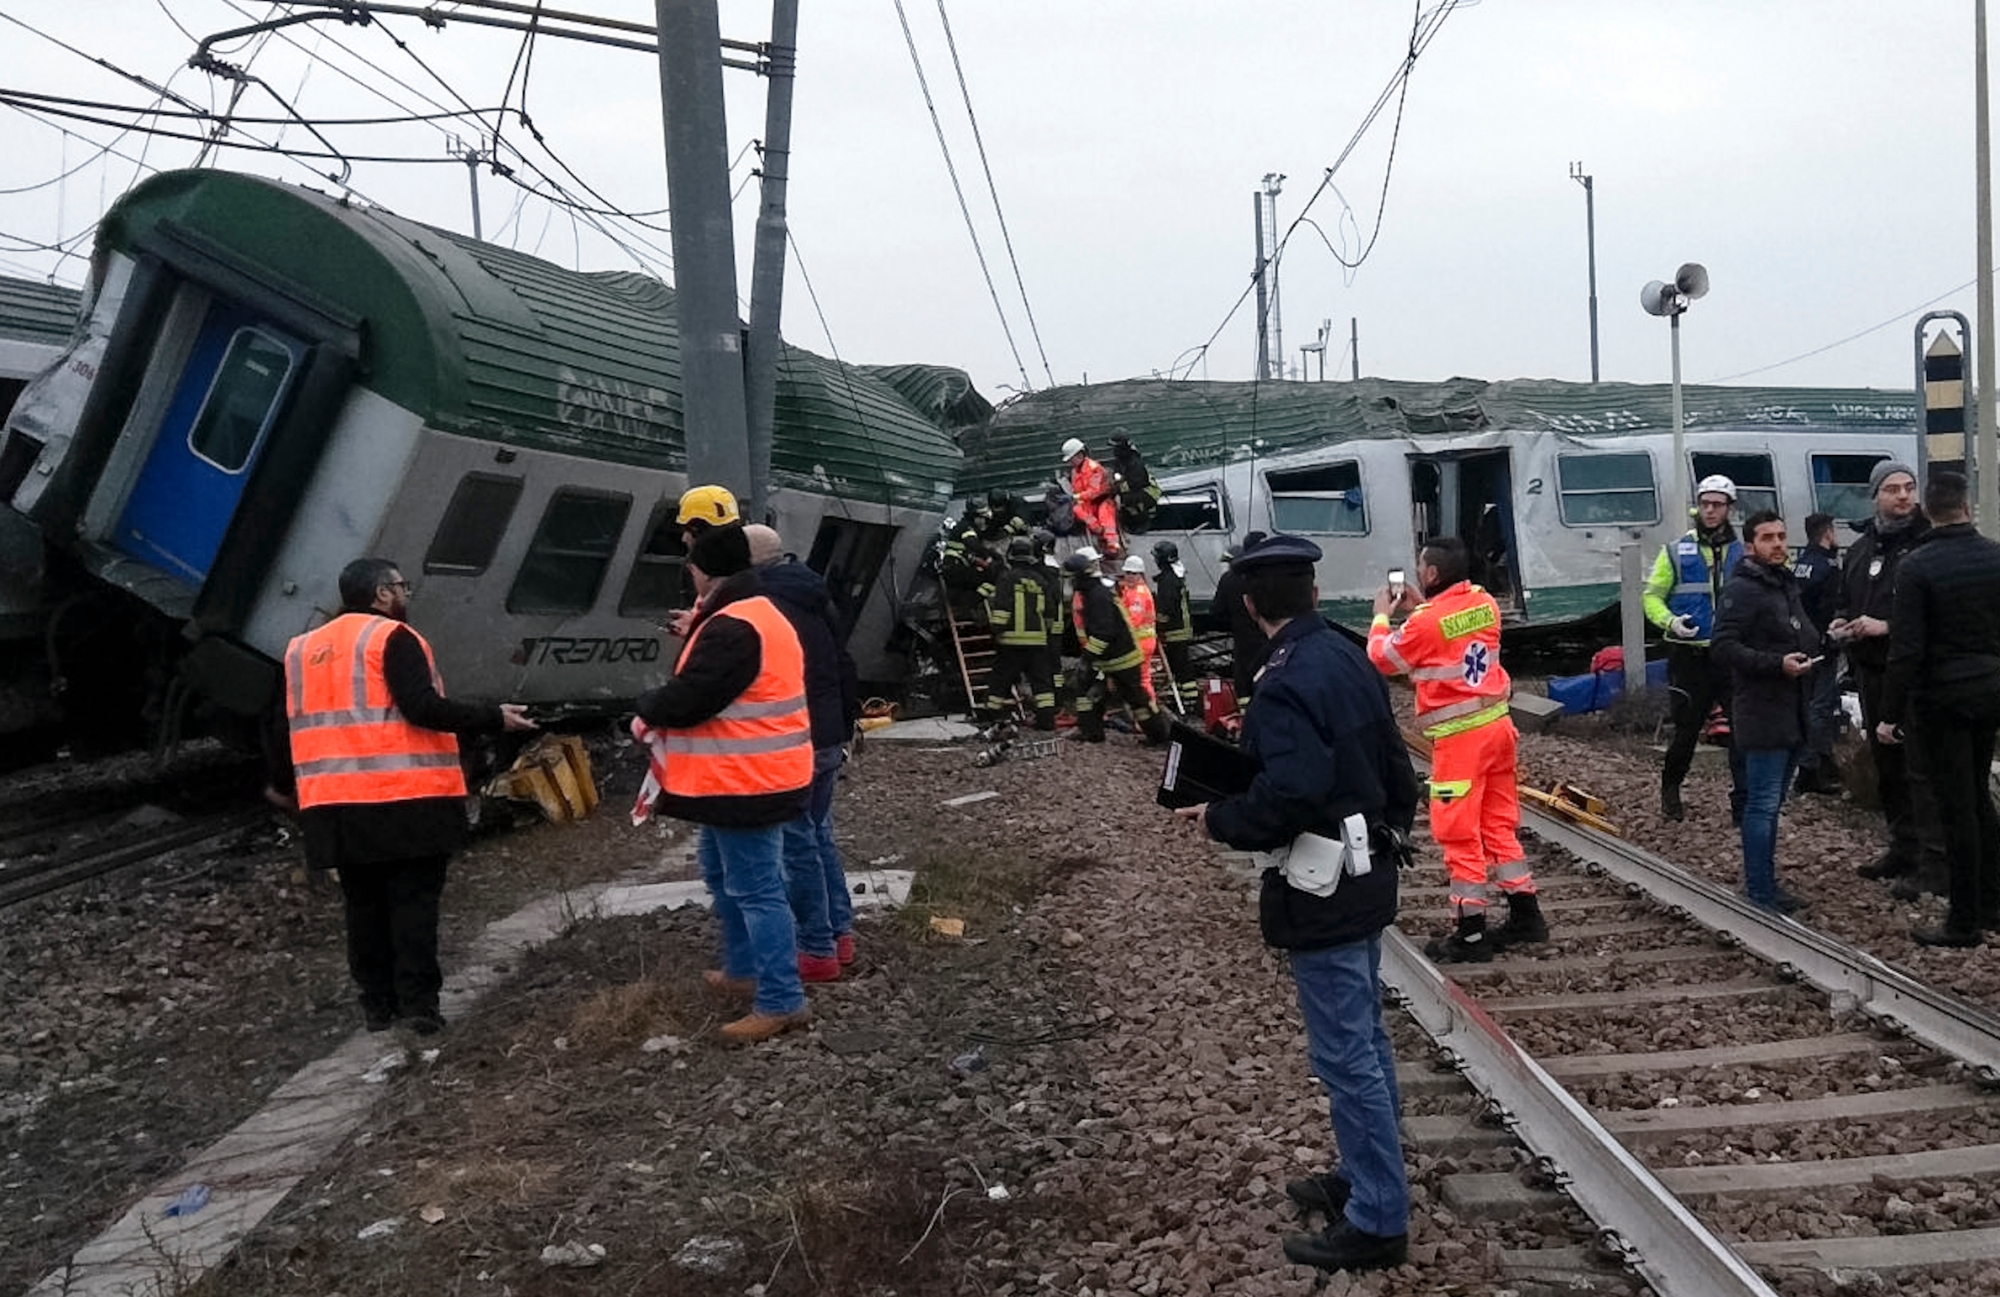 Rescuers work at the wrecked car of a train that derailed at the station of Pioltello Limito, on the outskirts of Milan, Italy, Thursday, Jan. 25, 2018. Italian officials said that the commuter train derailed in northern Italy, killing some people, seriously injuring 10 and trapping others heading into Milan at the start of the work day. (AP Photo) Italy Train Derailment